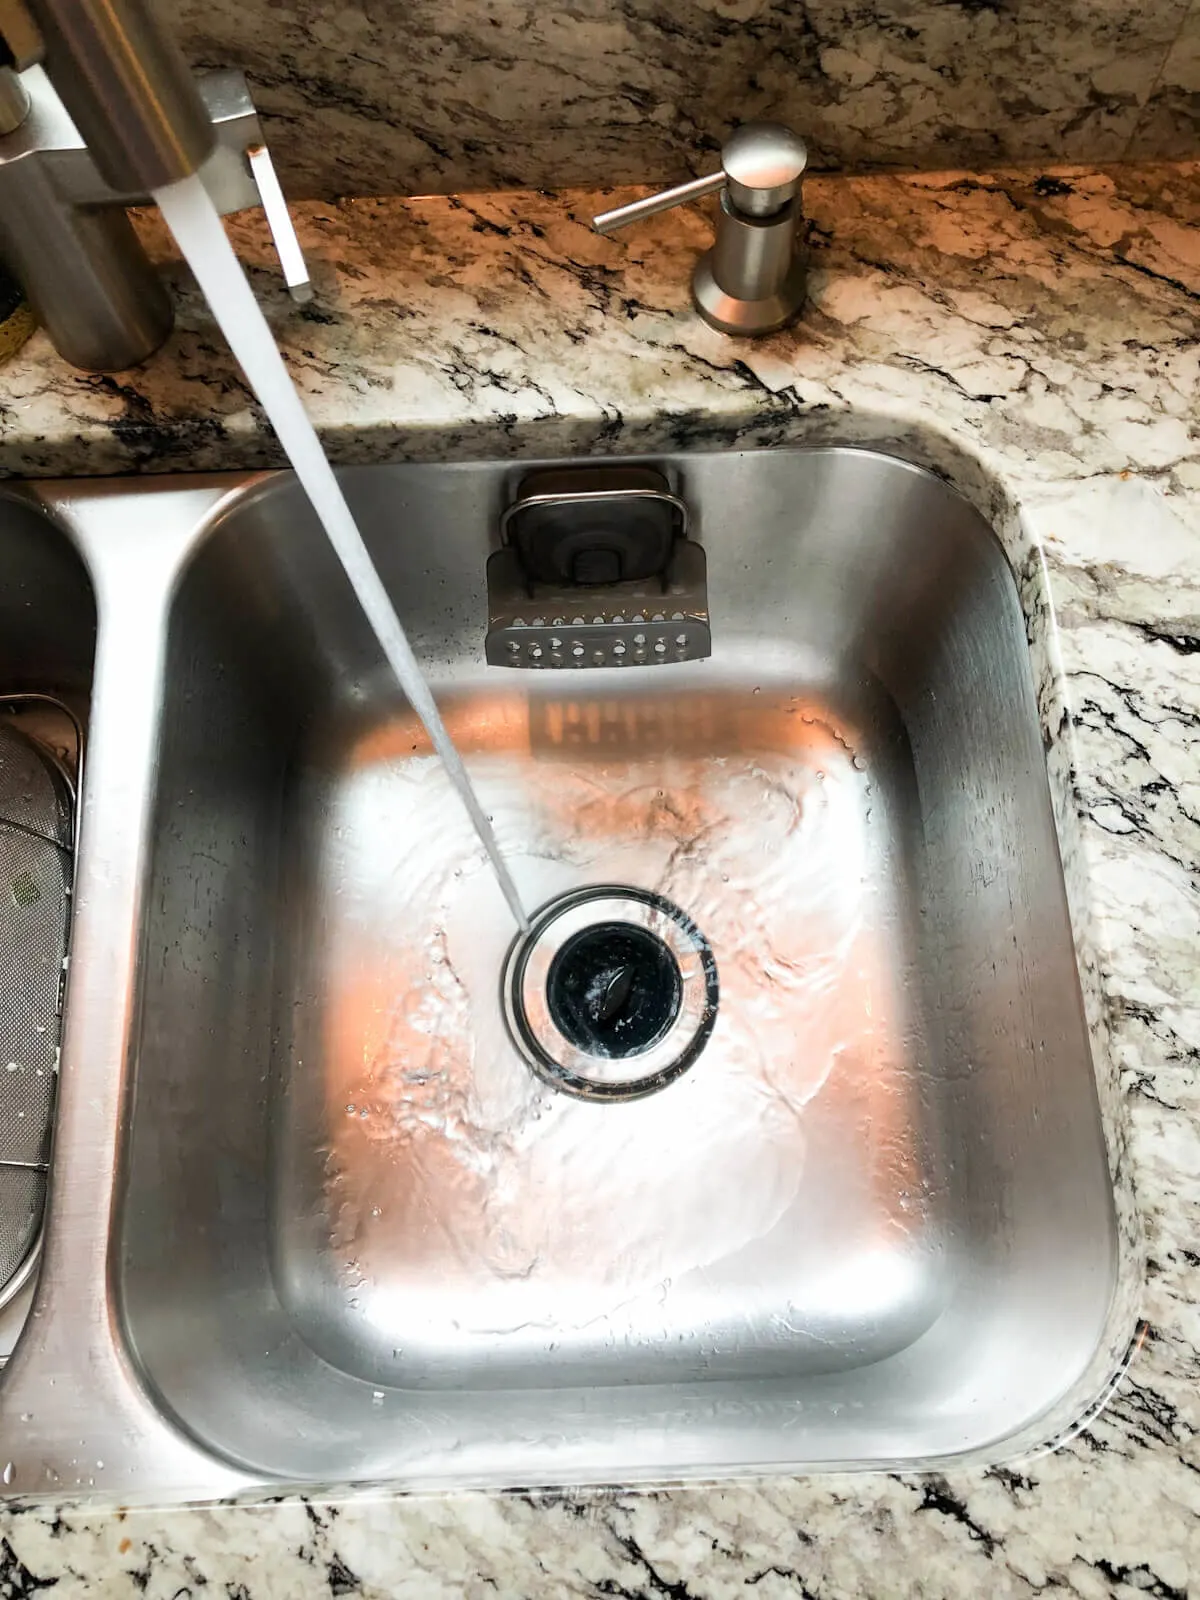 stainless steel sink being filled with water